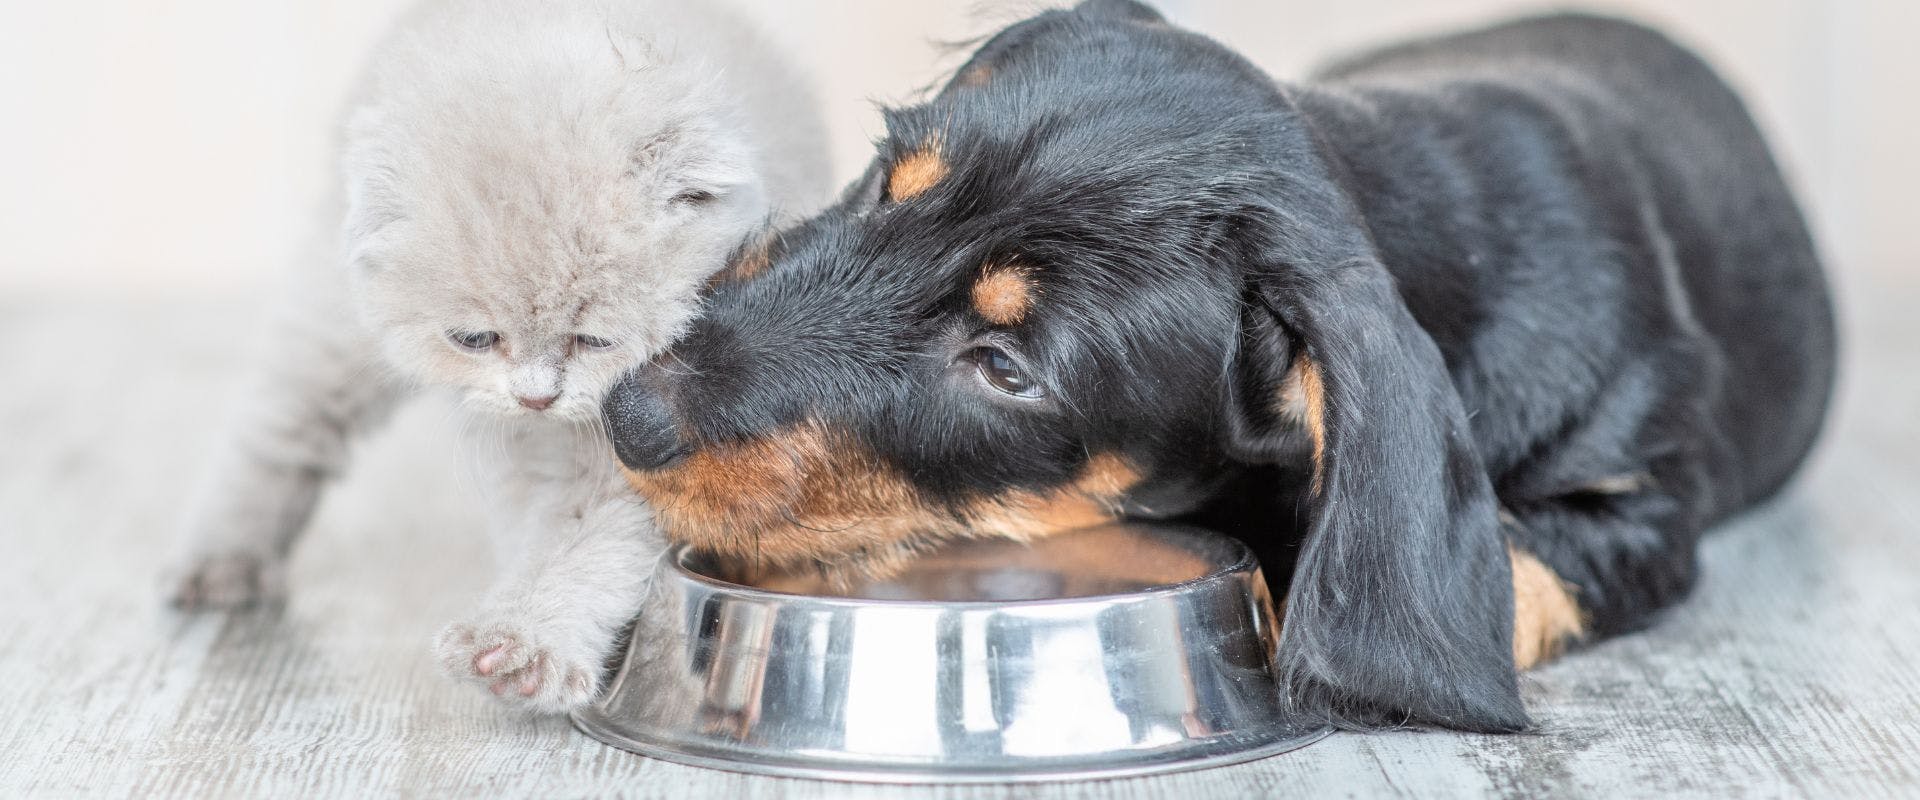 Dachshund puppy and baby kitten eat together from one bowl at home